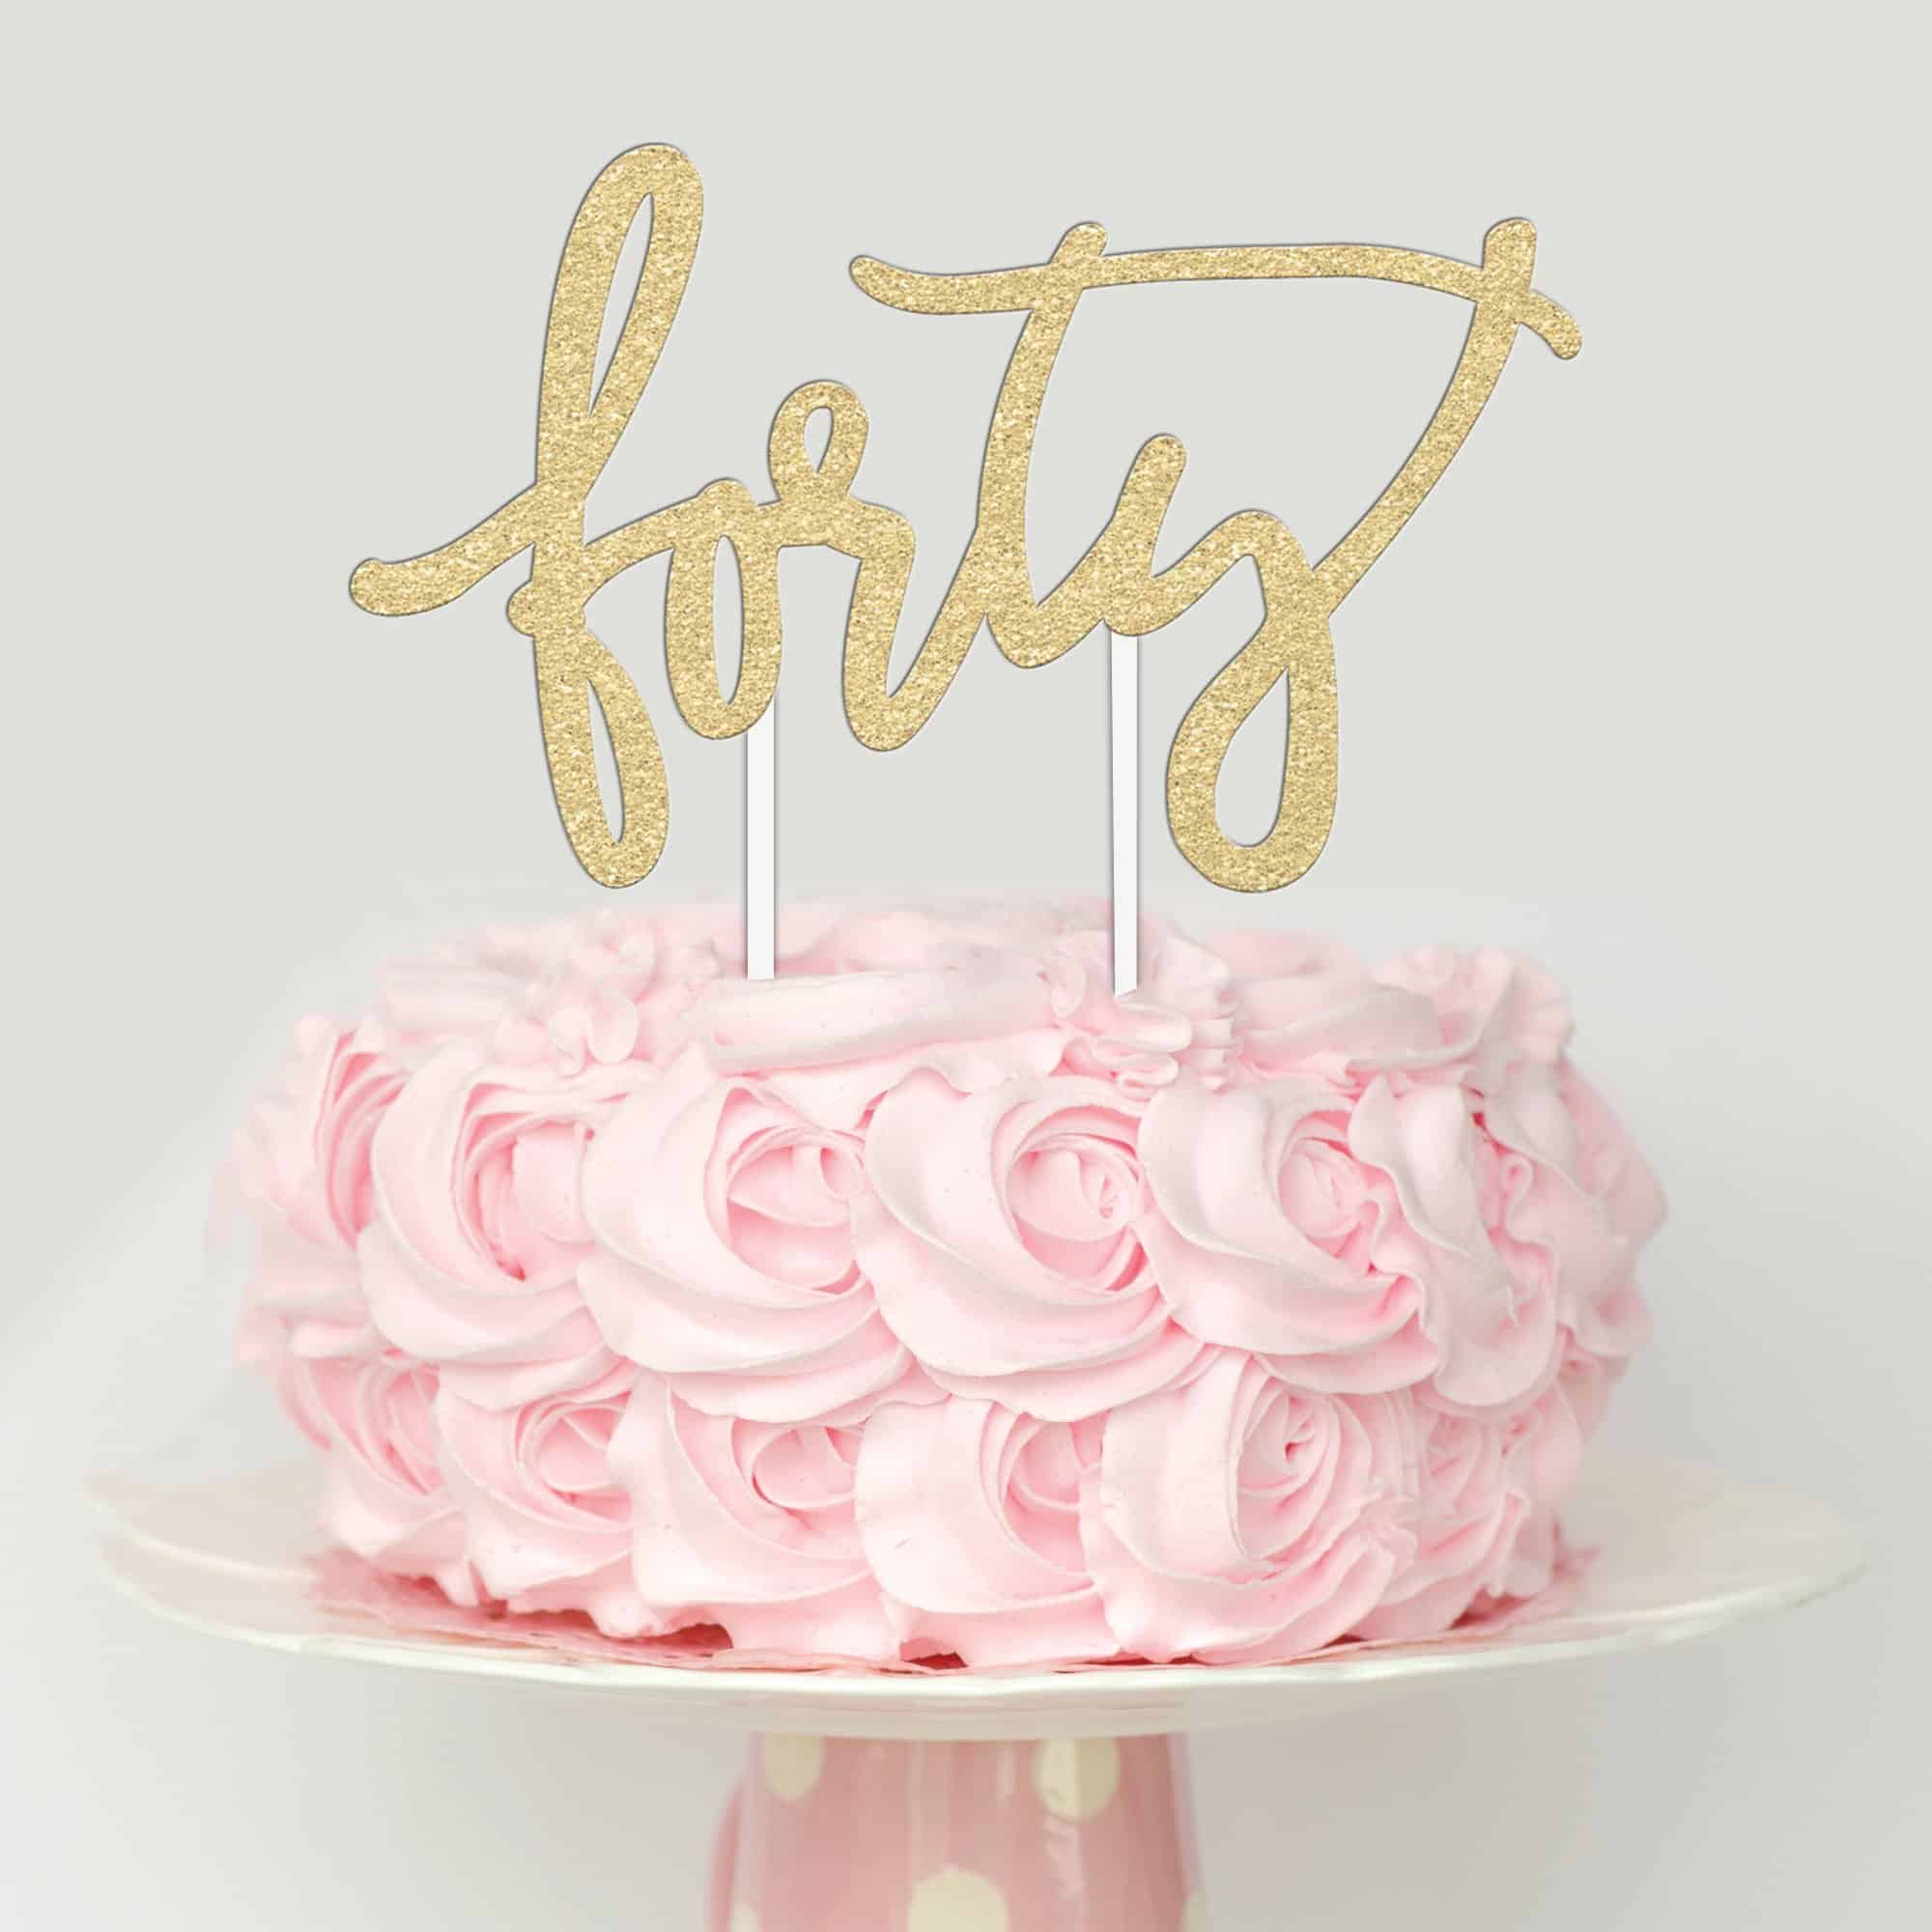 9 Best 40th Birthday Cakes in 3 Categories + Cake-Themed Gifts